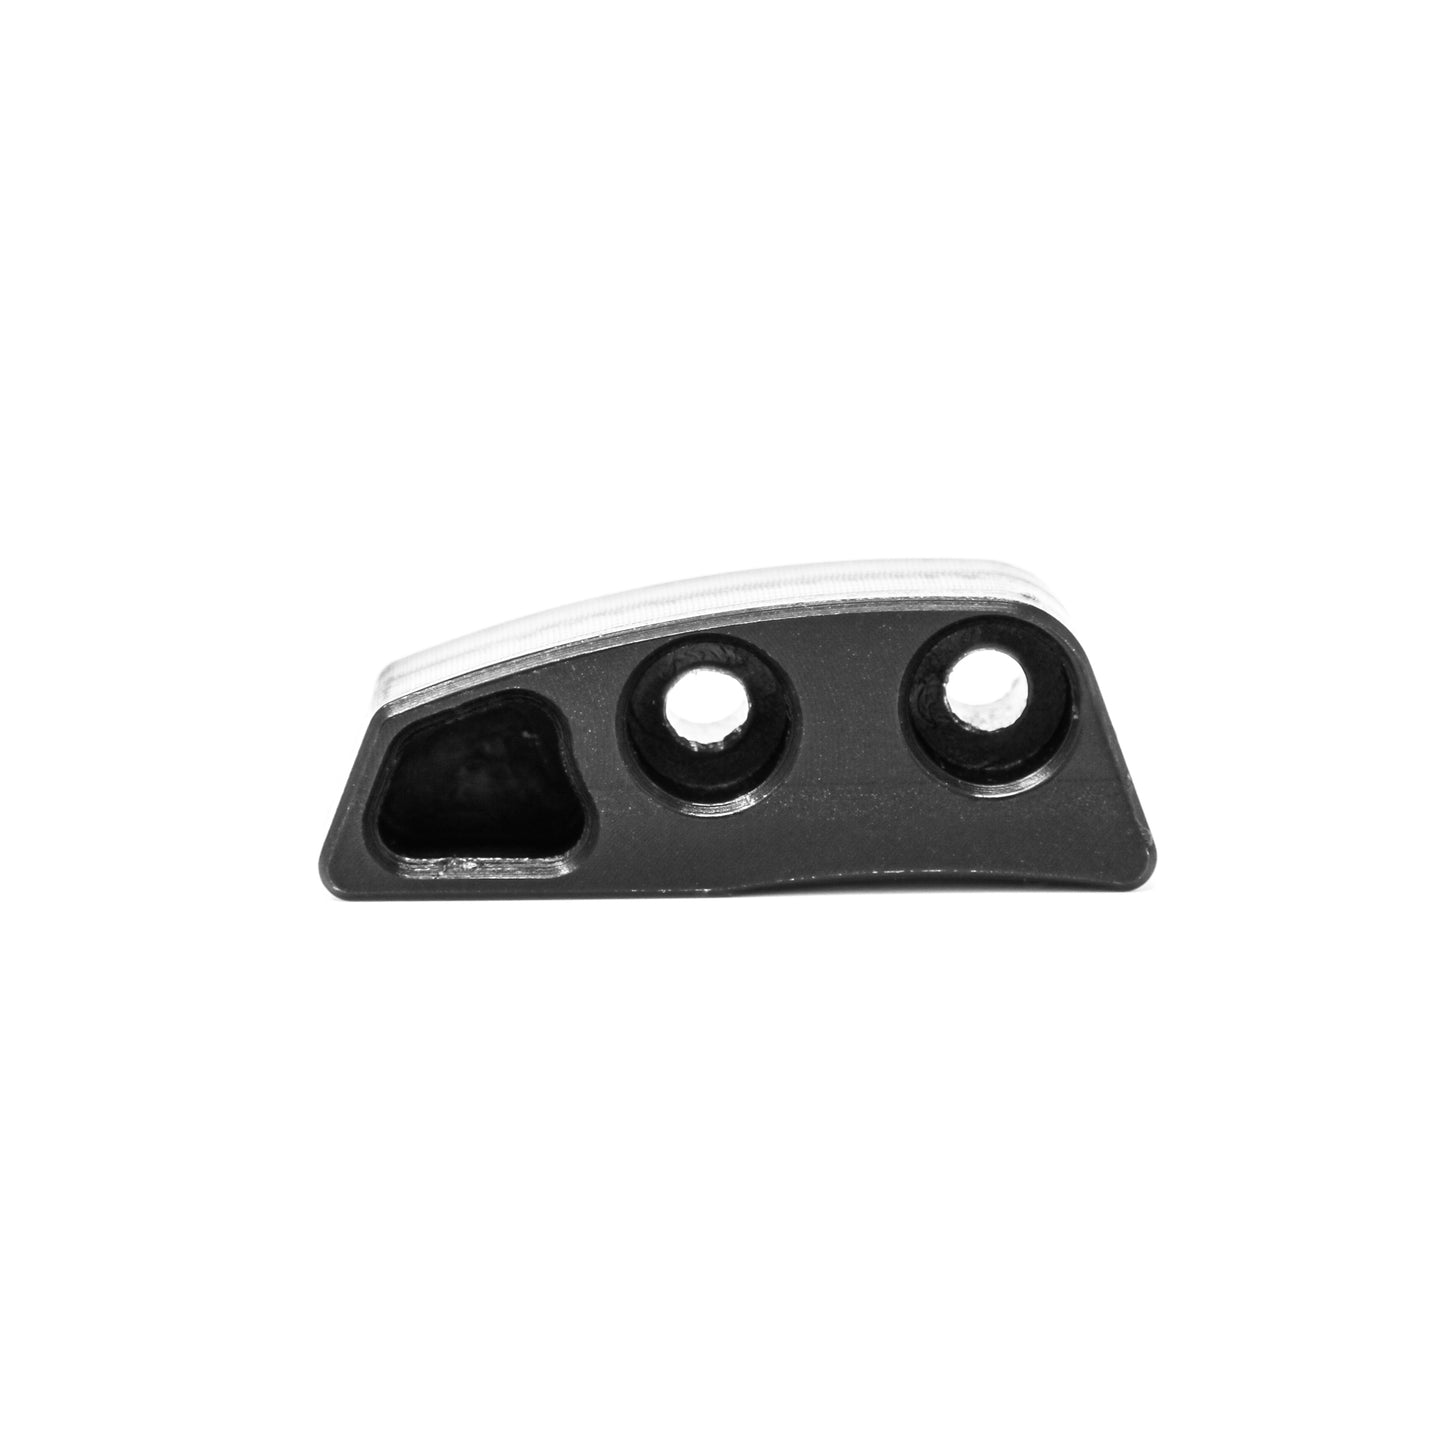 ISCG 05 Spare Upper Chain Guide Plastic 30 Tooth